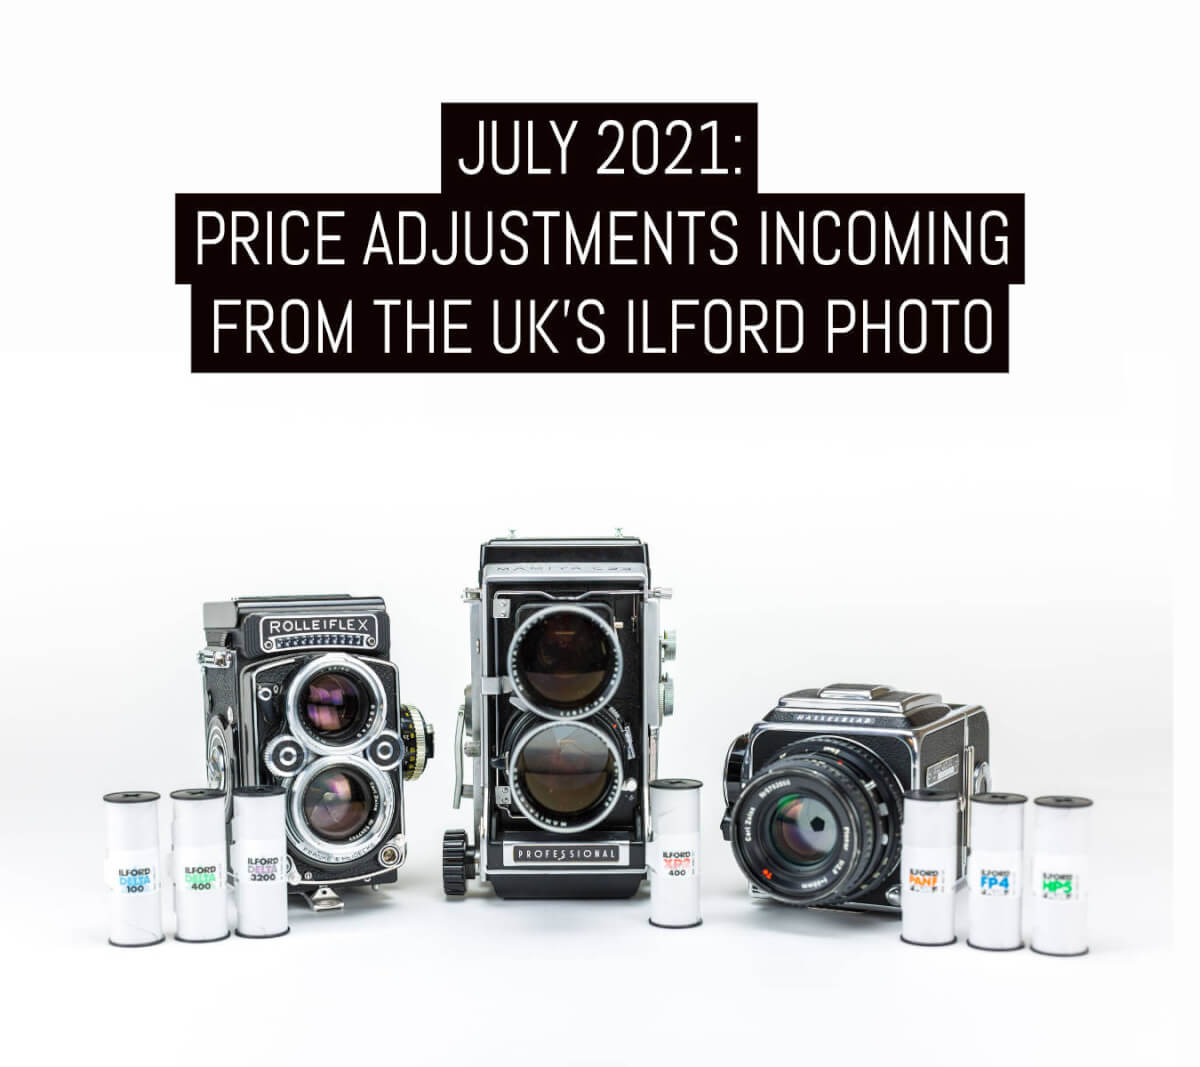 July 2021: Price adjustments incoming from the UK’s ILFORD Photo